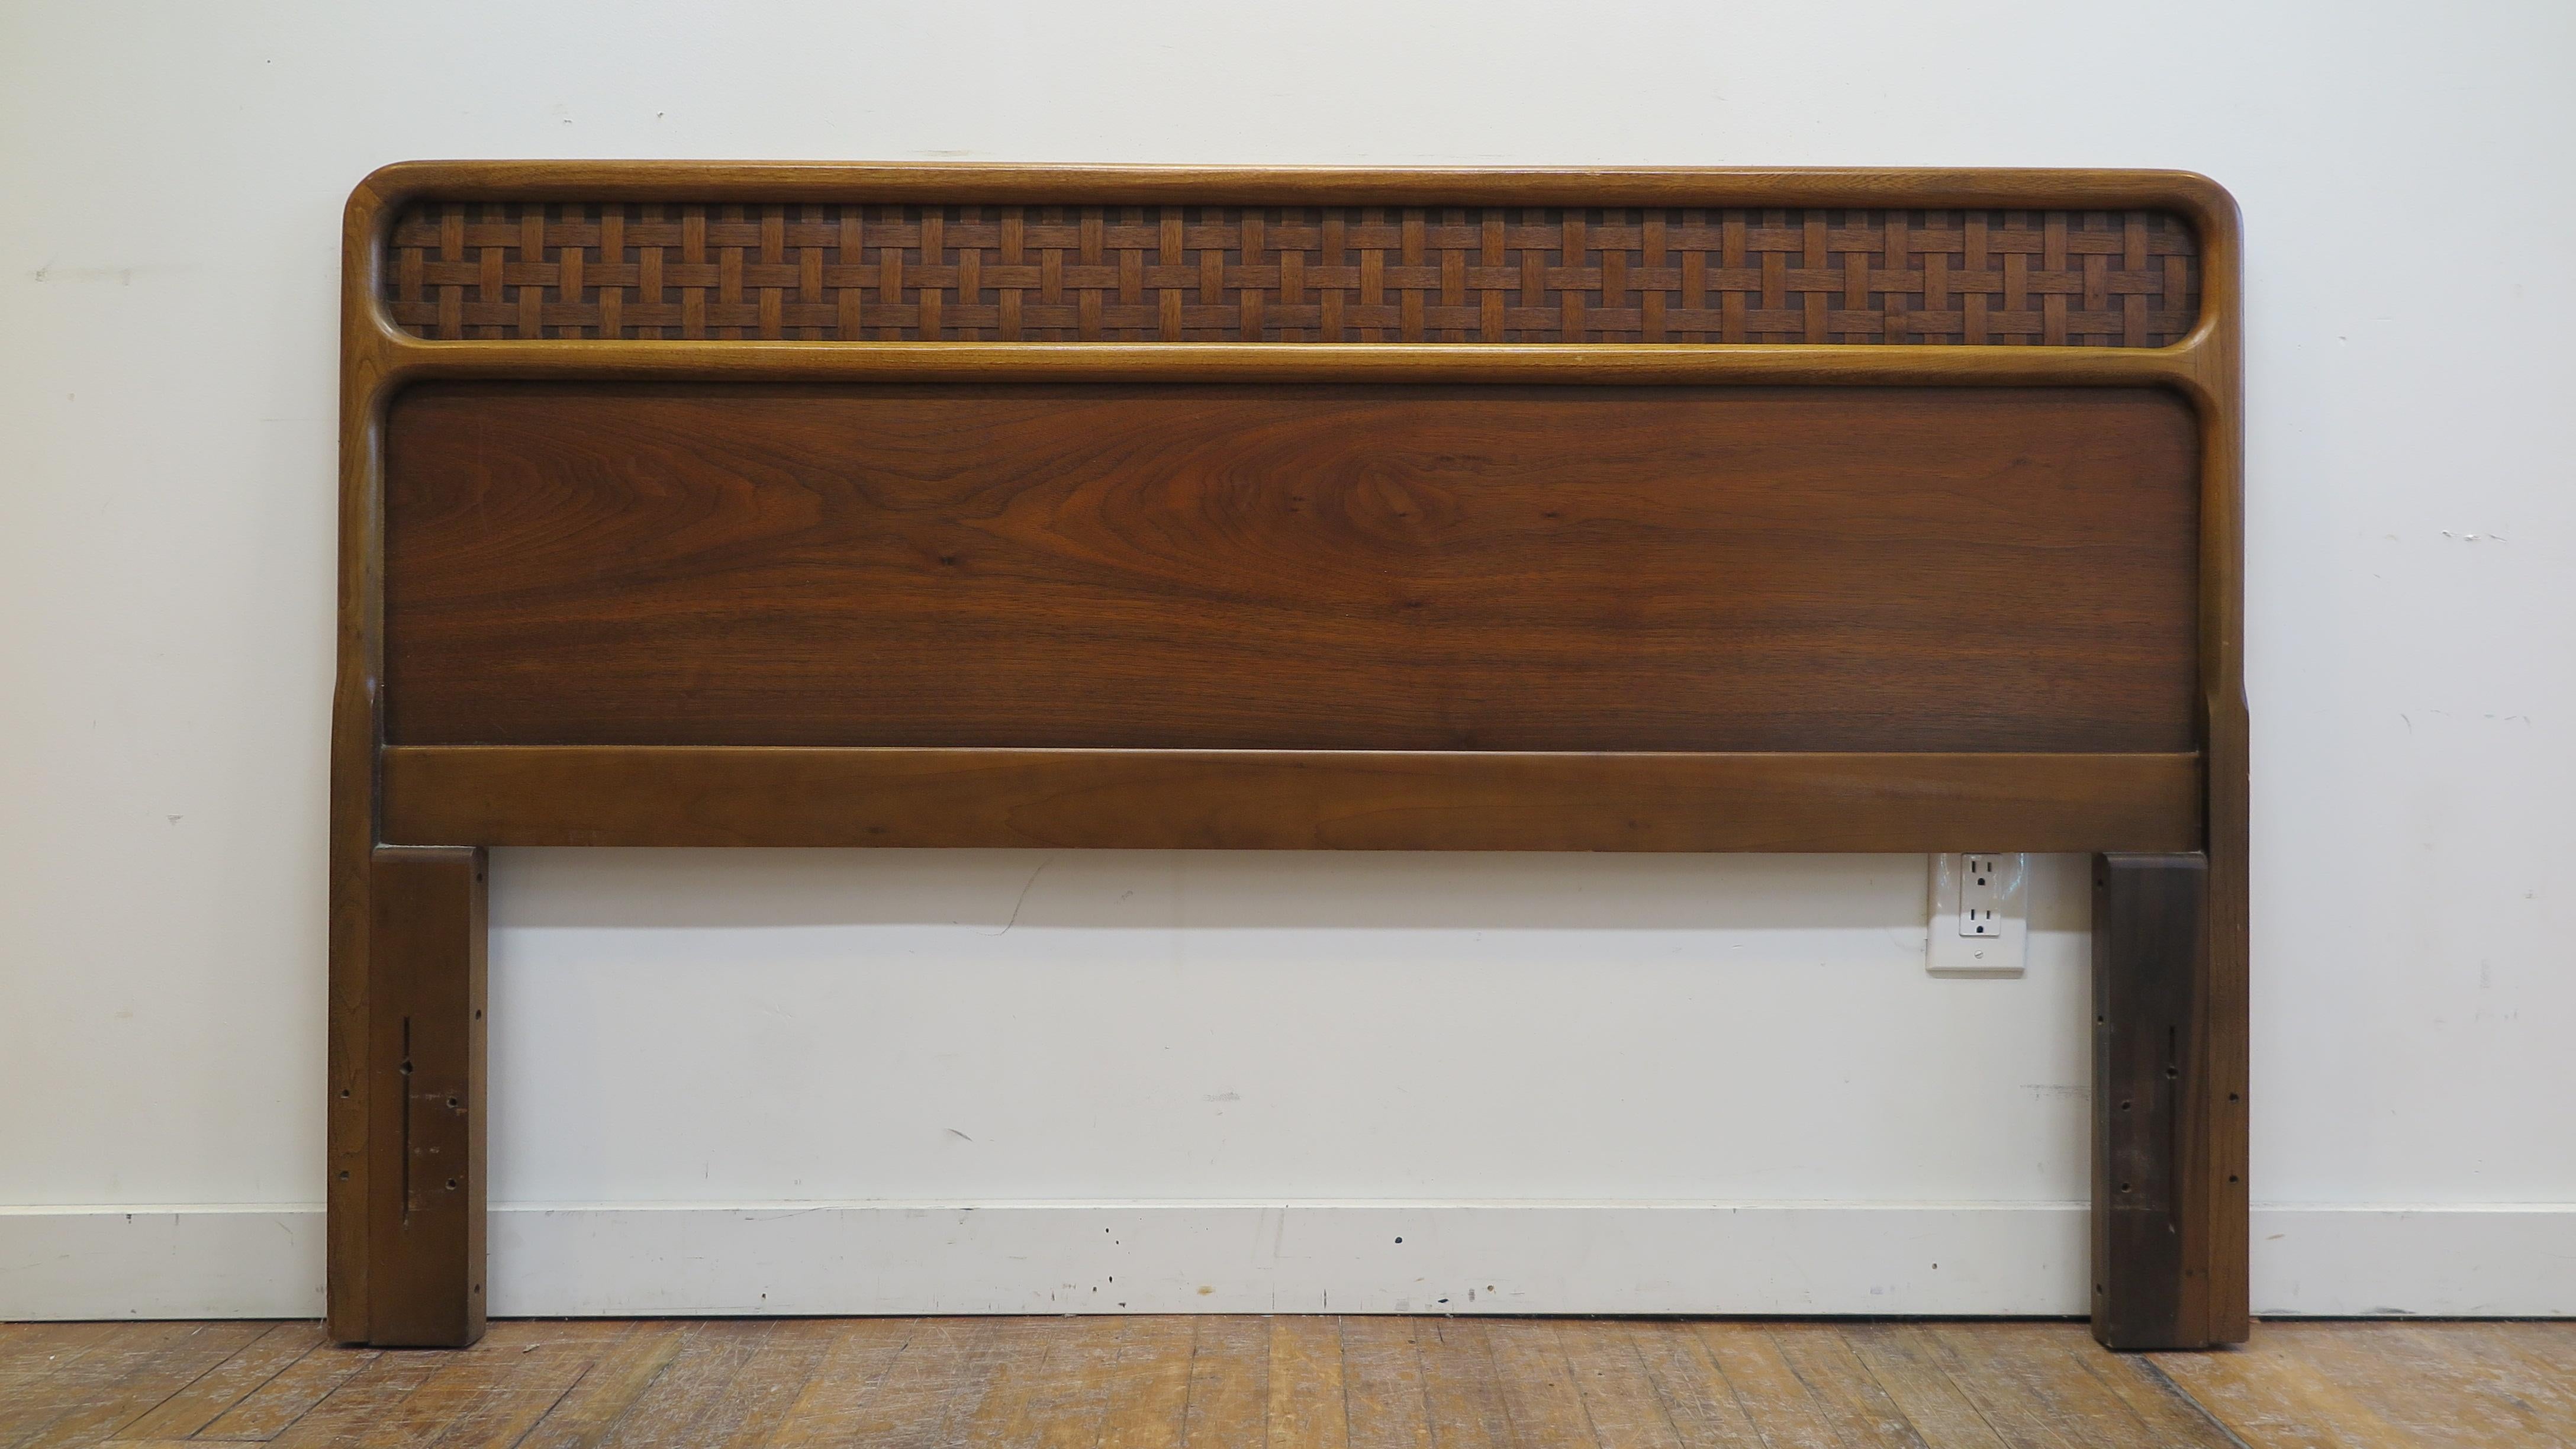 Mid-Century Modern Lane Perception headboard full size. Full size Mid-Century Modern headboard designed by Warren Church for Lane Perception Line, in very good condition. Walnut strands woven top detail, rounded corners all walnut. Rolling frame